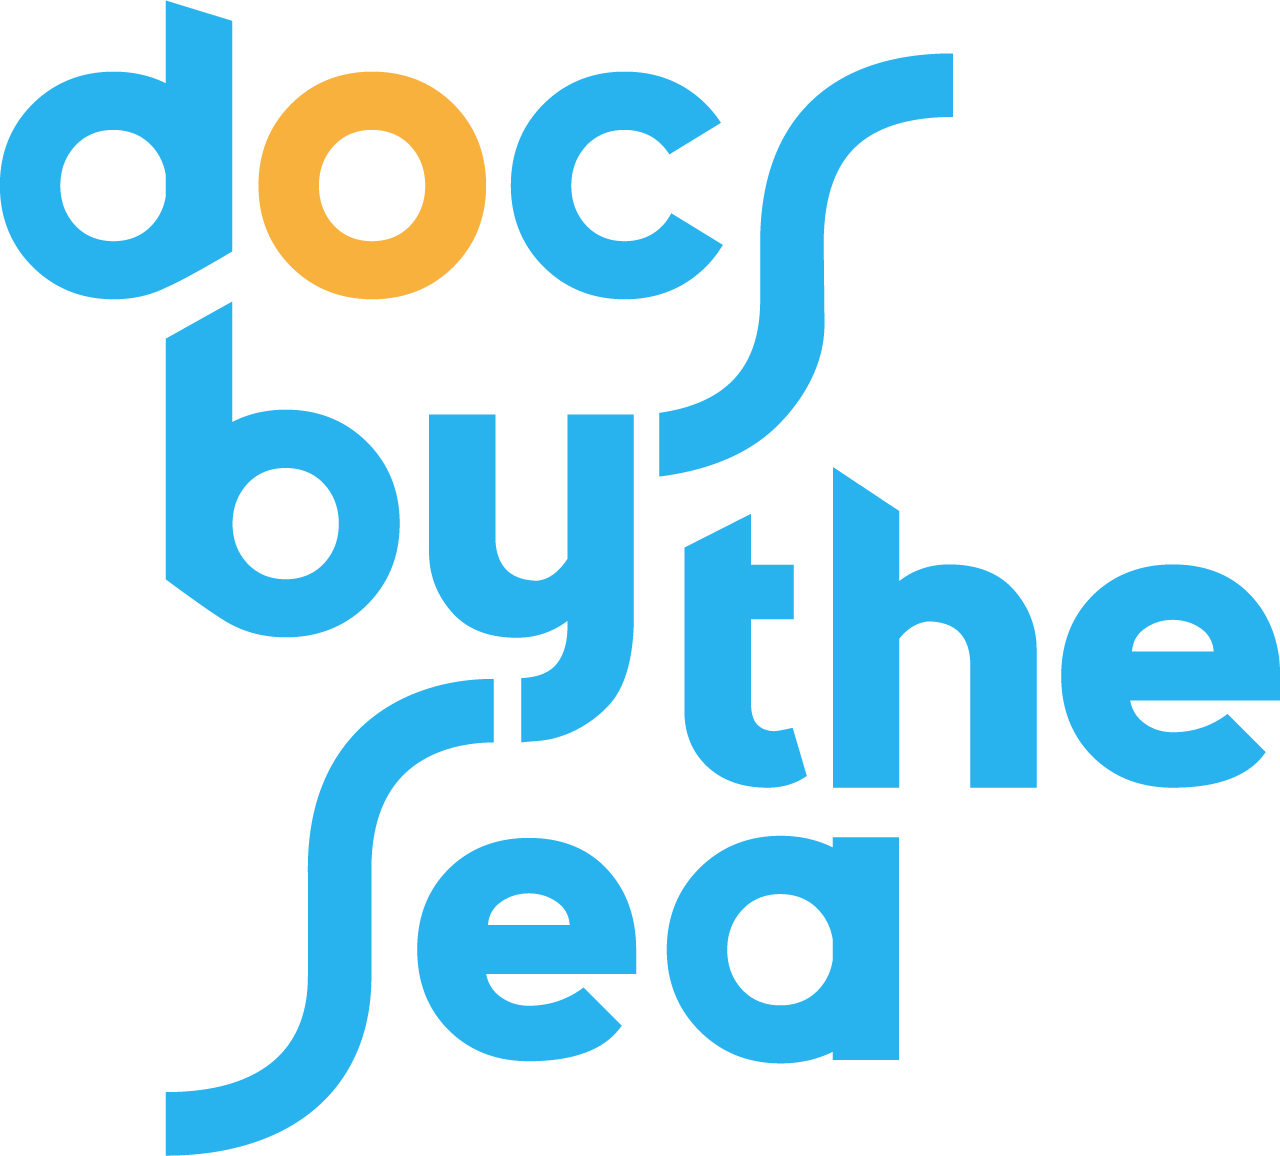 Docs By The Sea logo. Blue and gold text.